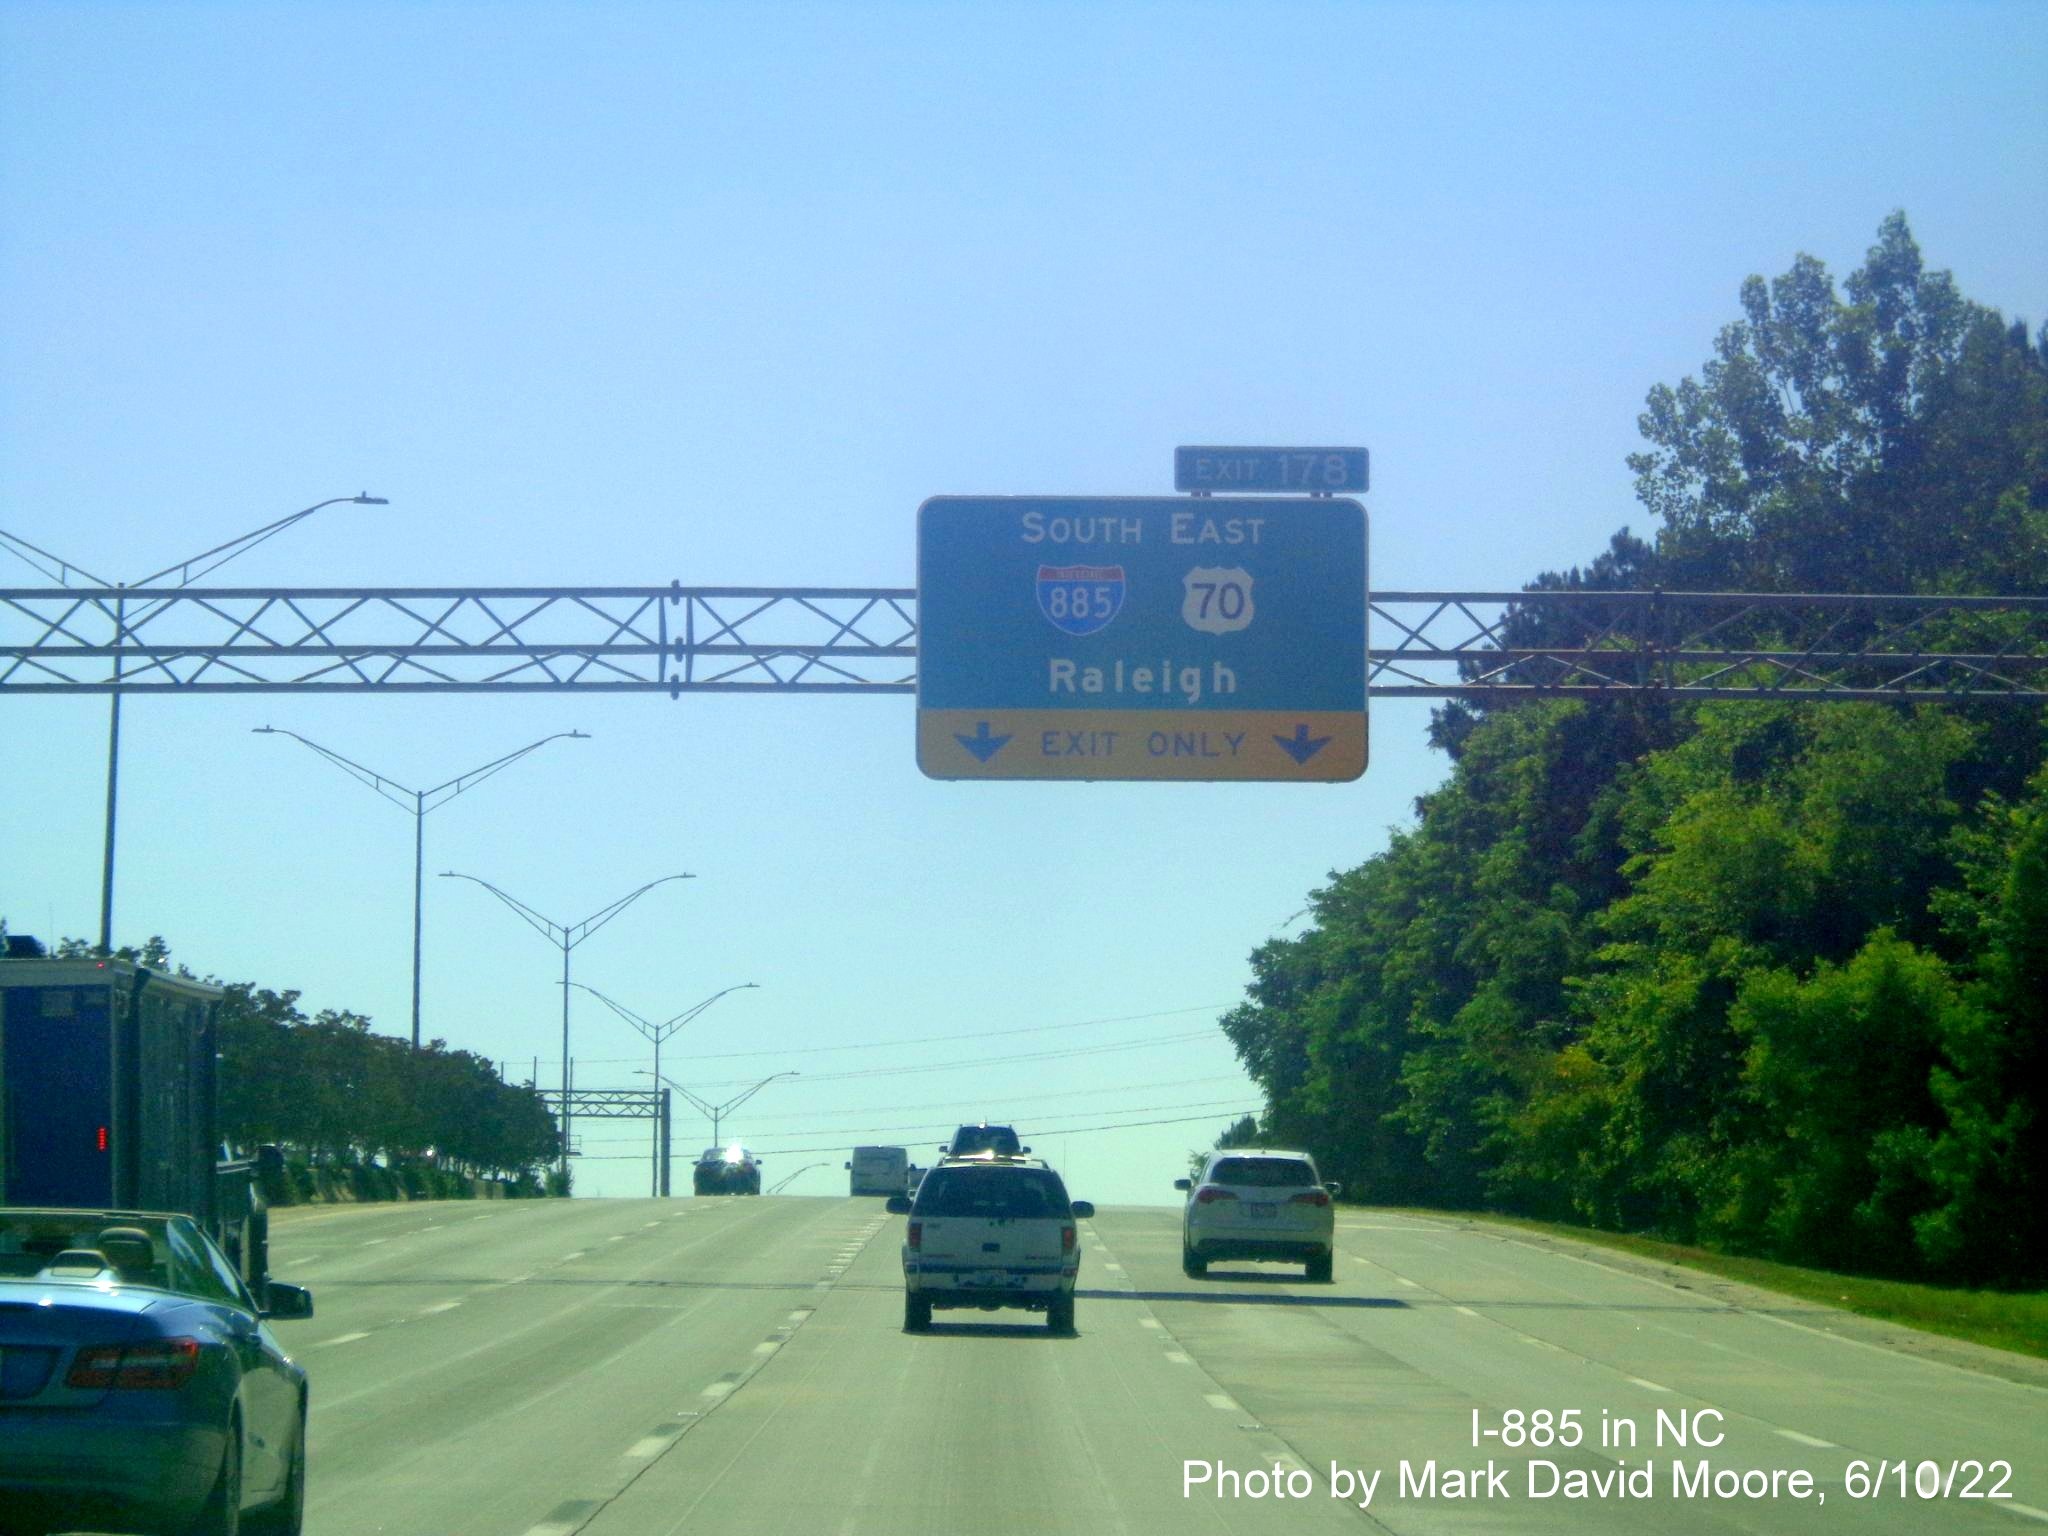 Image of 1/2 mile a advance overhead sign for new I-885 South/US 70 East exit
        on I-85 North/US 70 East in Durham, by Mark David Moore June 2022